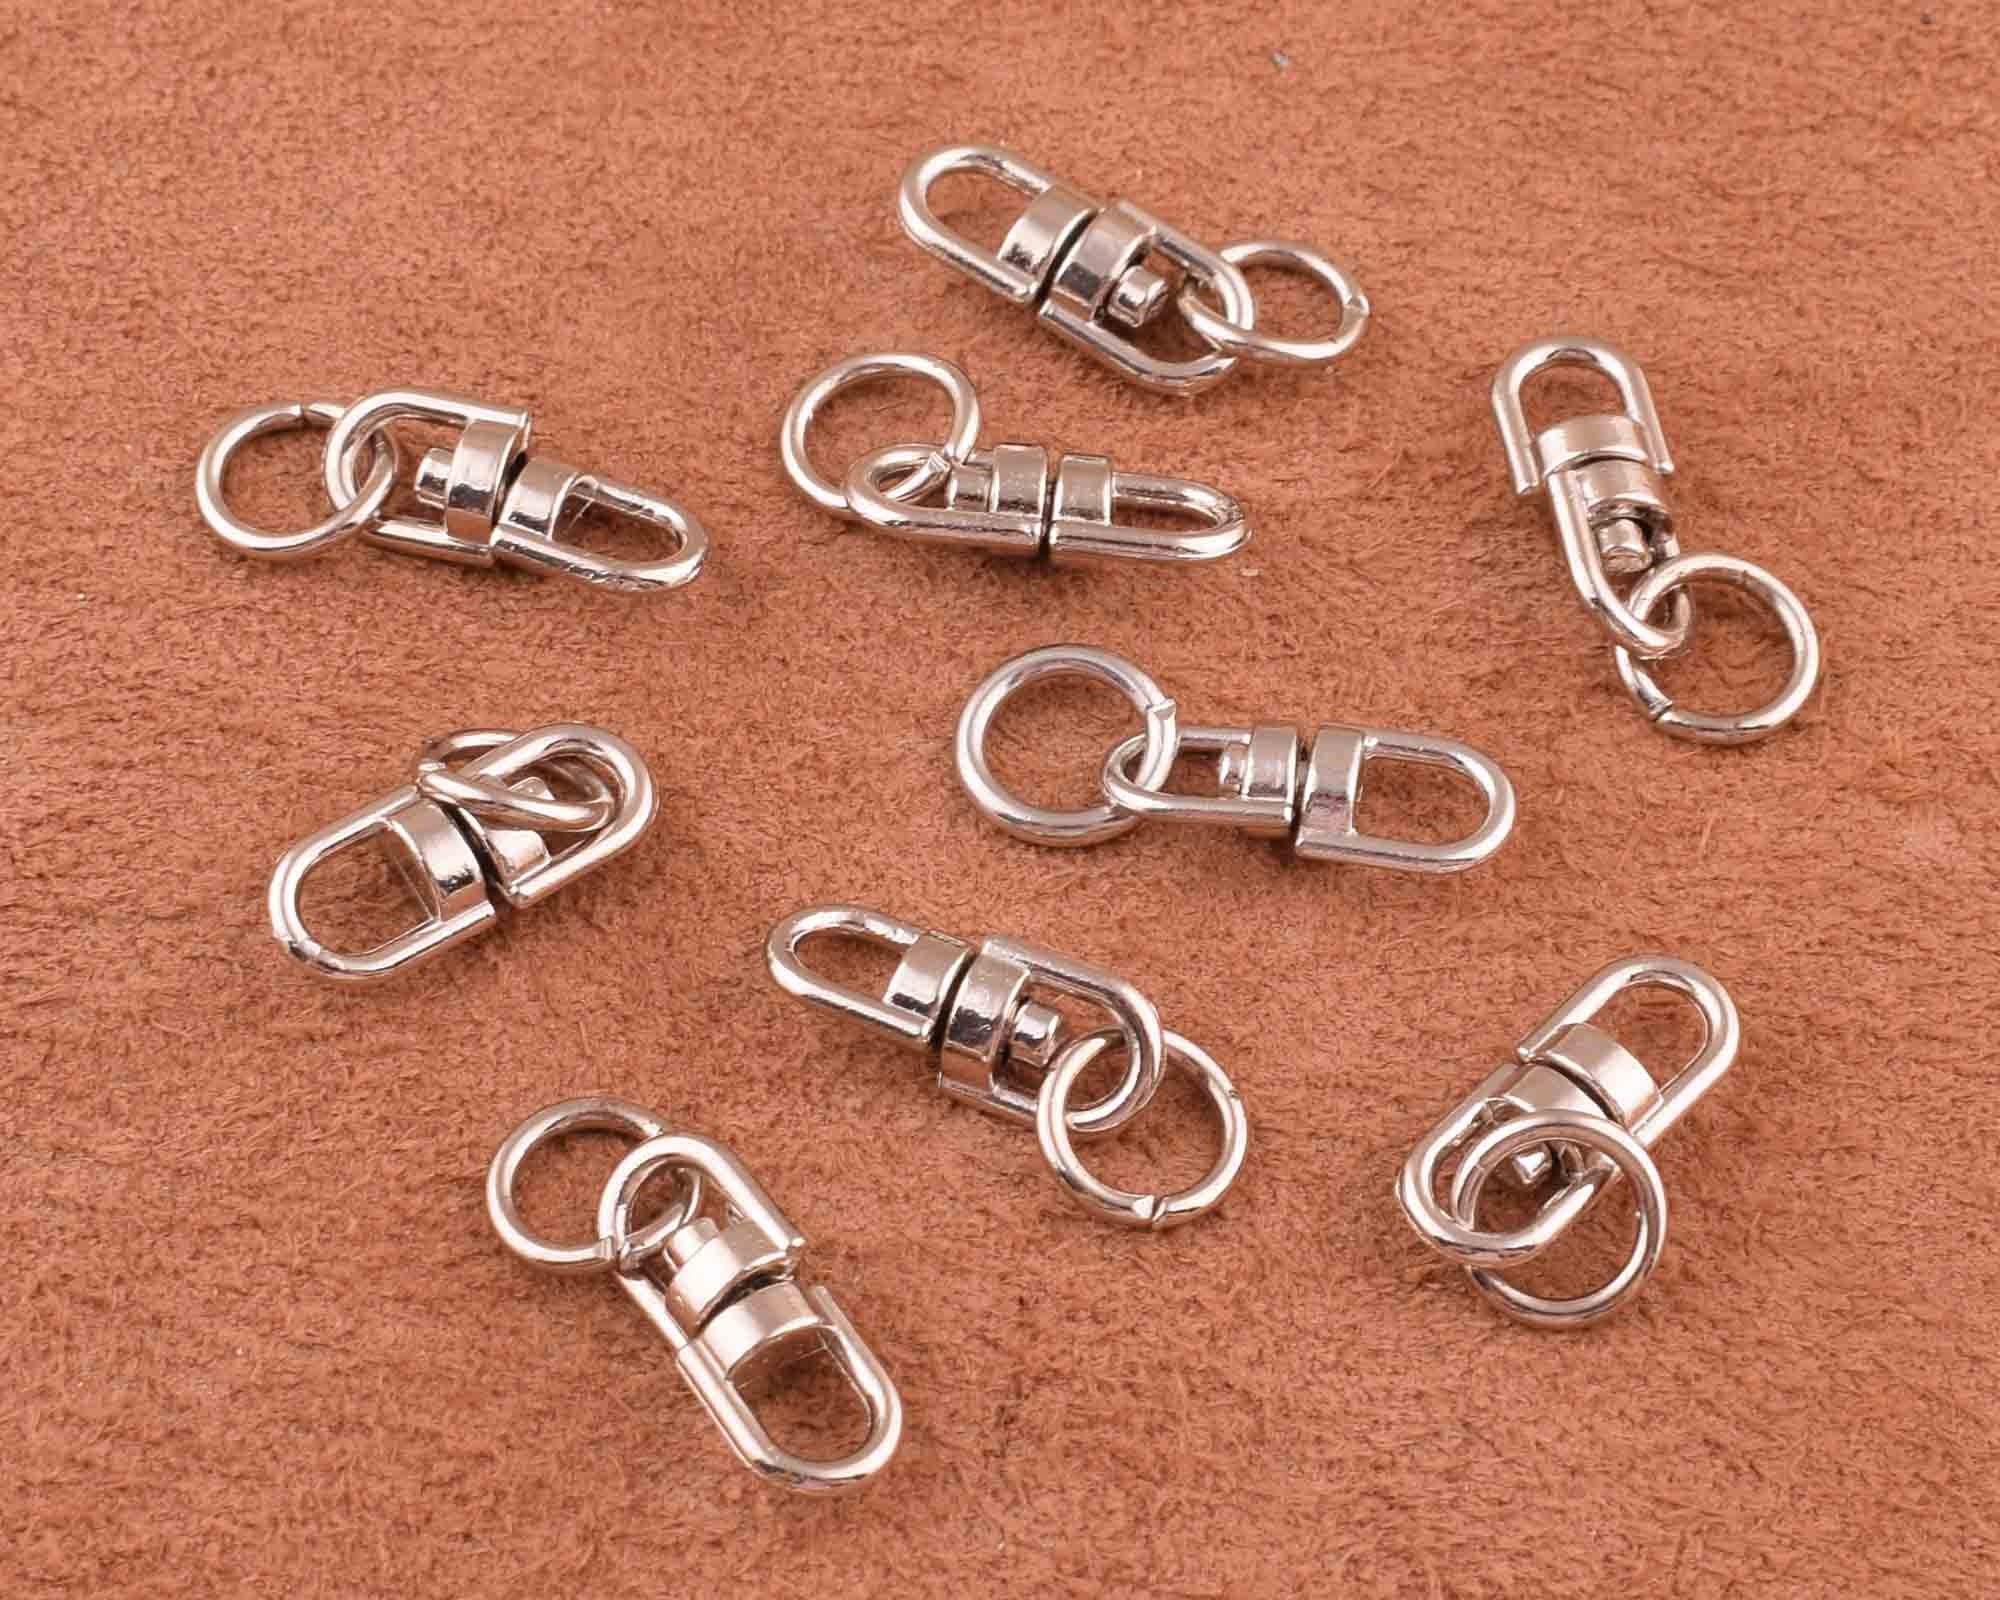 100pcs Swivel Ring Silver Connectors Bulk Swivel Joint Charm Link,214mm Key  Wallet Hook Hardware Chain Ring for Key/diy Making Supply -  Canada